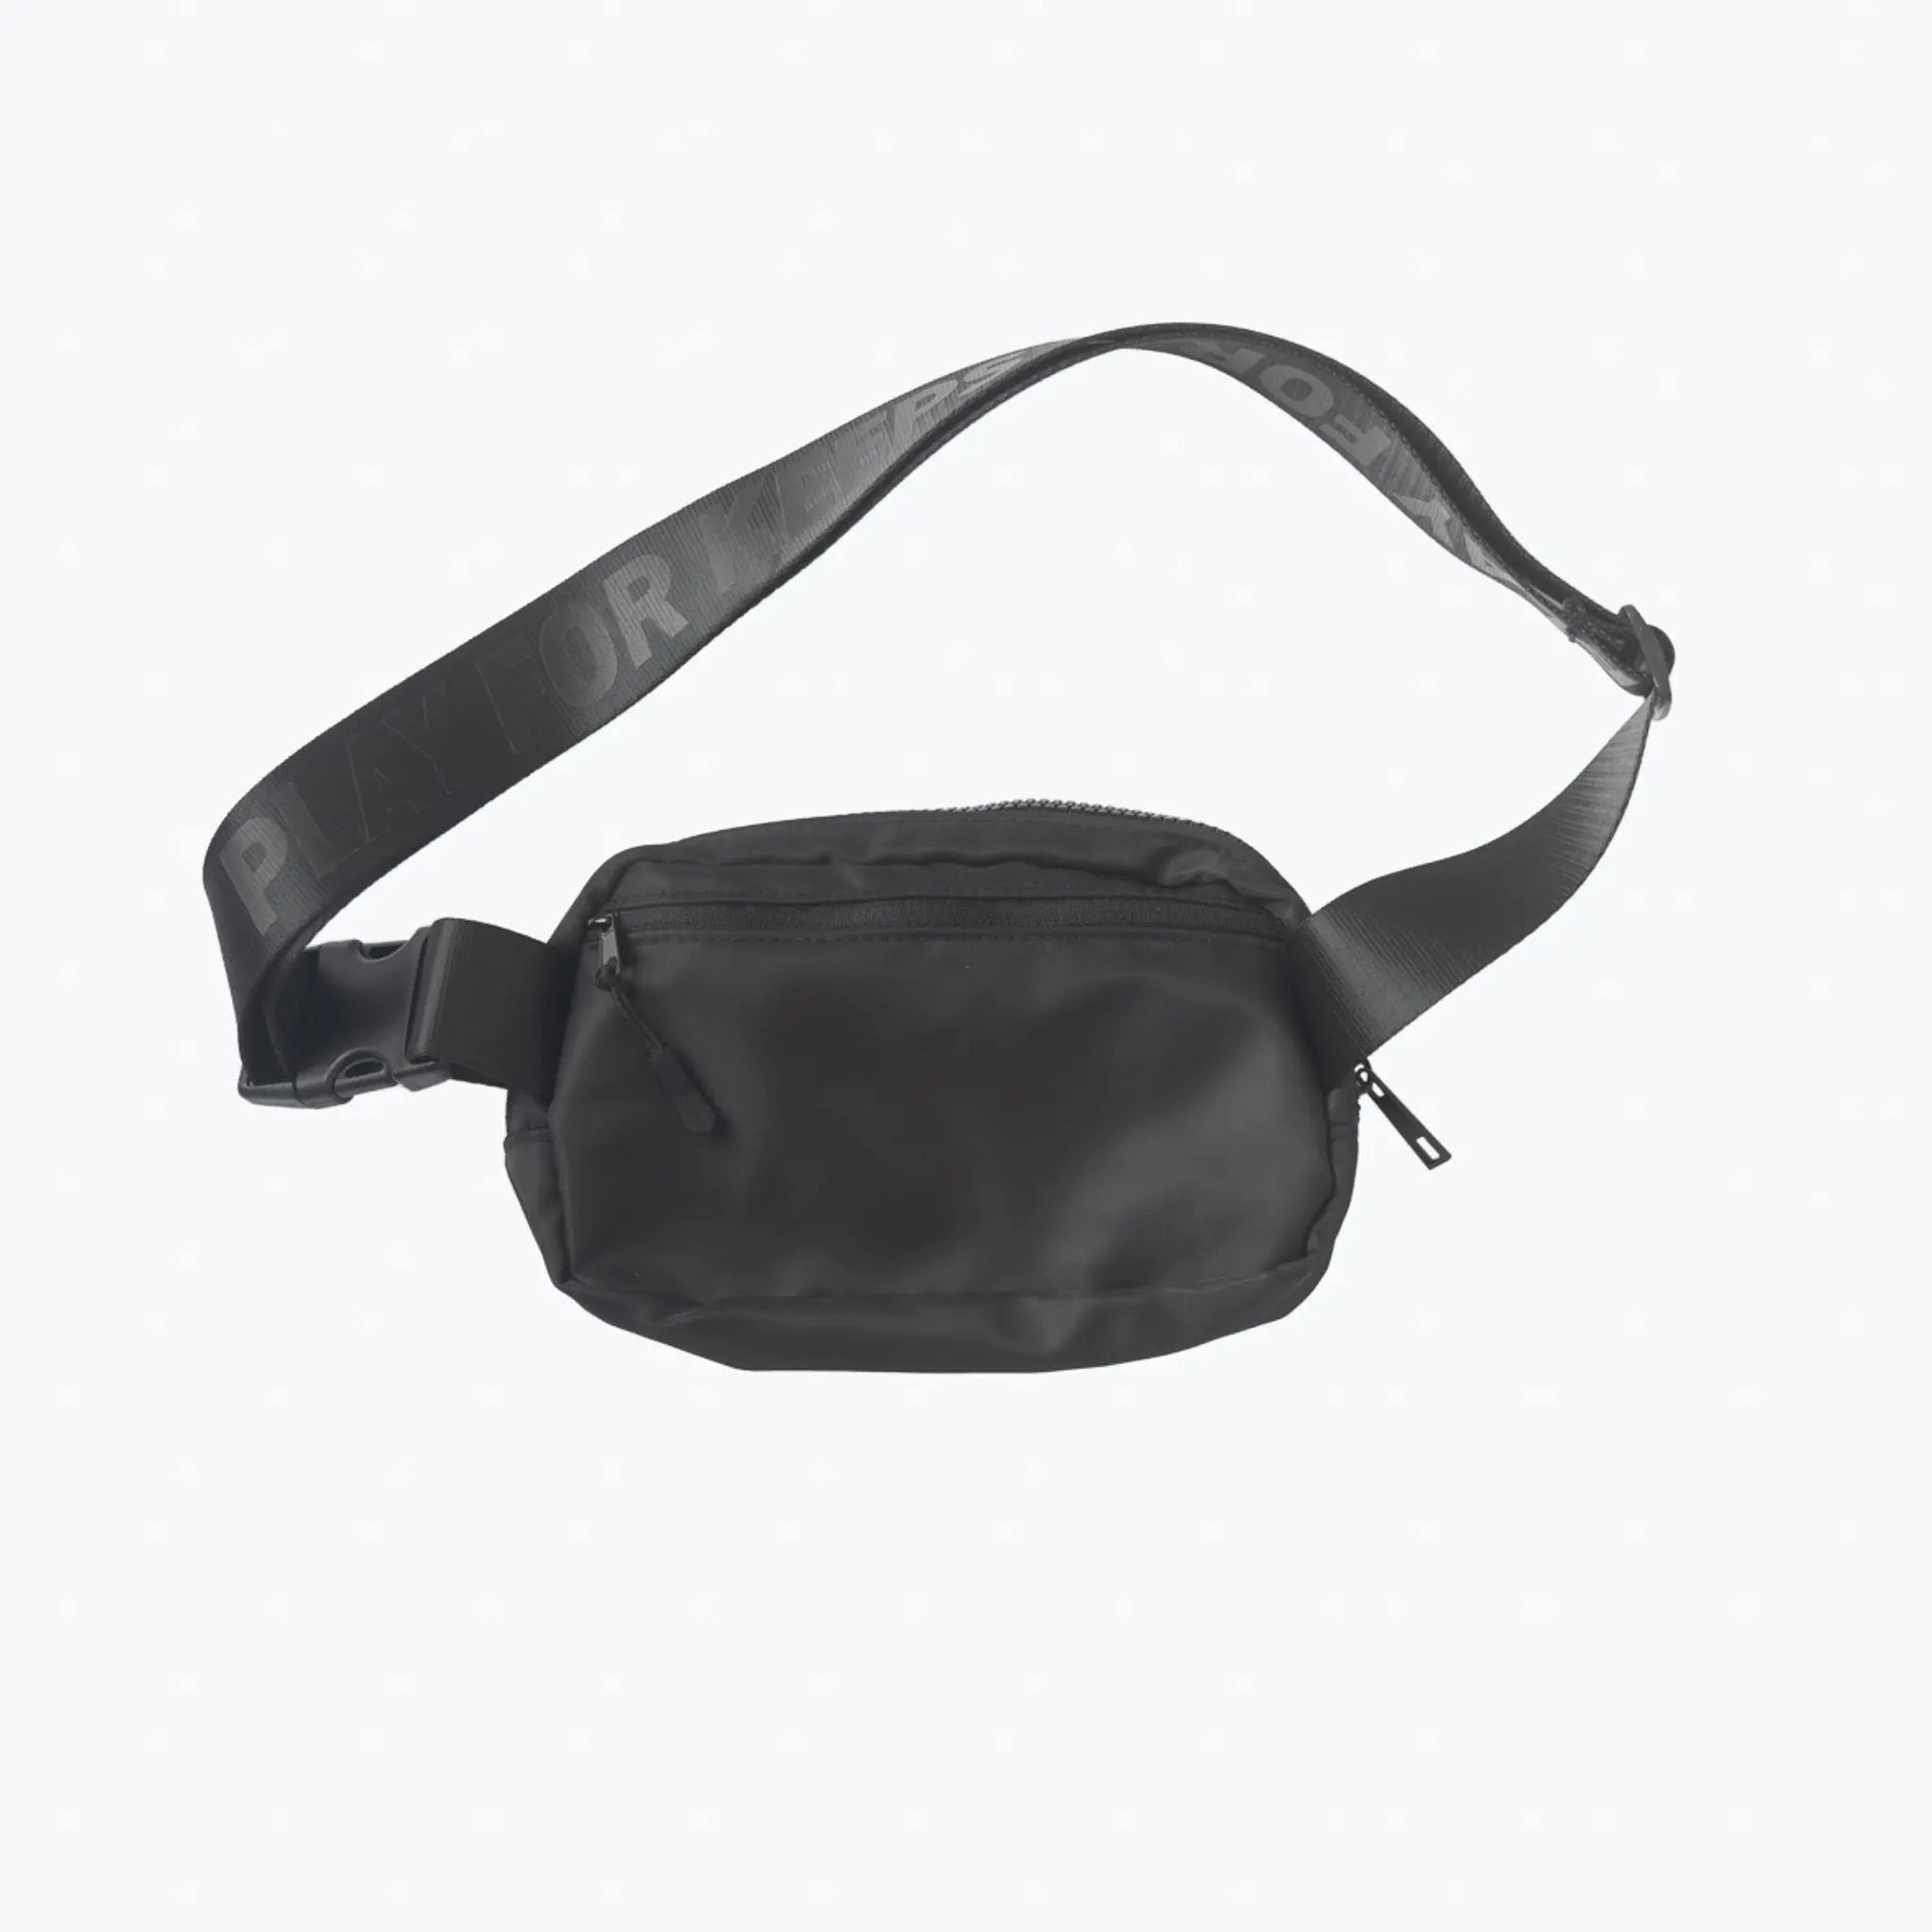 This image displays a black crossbody day bag from Tater Baseball, featuring a sleek design with the brand's logo on the strap, conveying a stylish and practical accessory for everyday use.